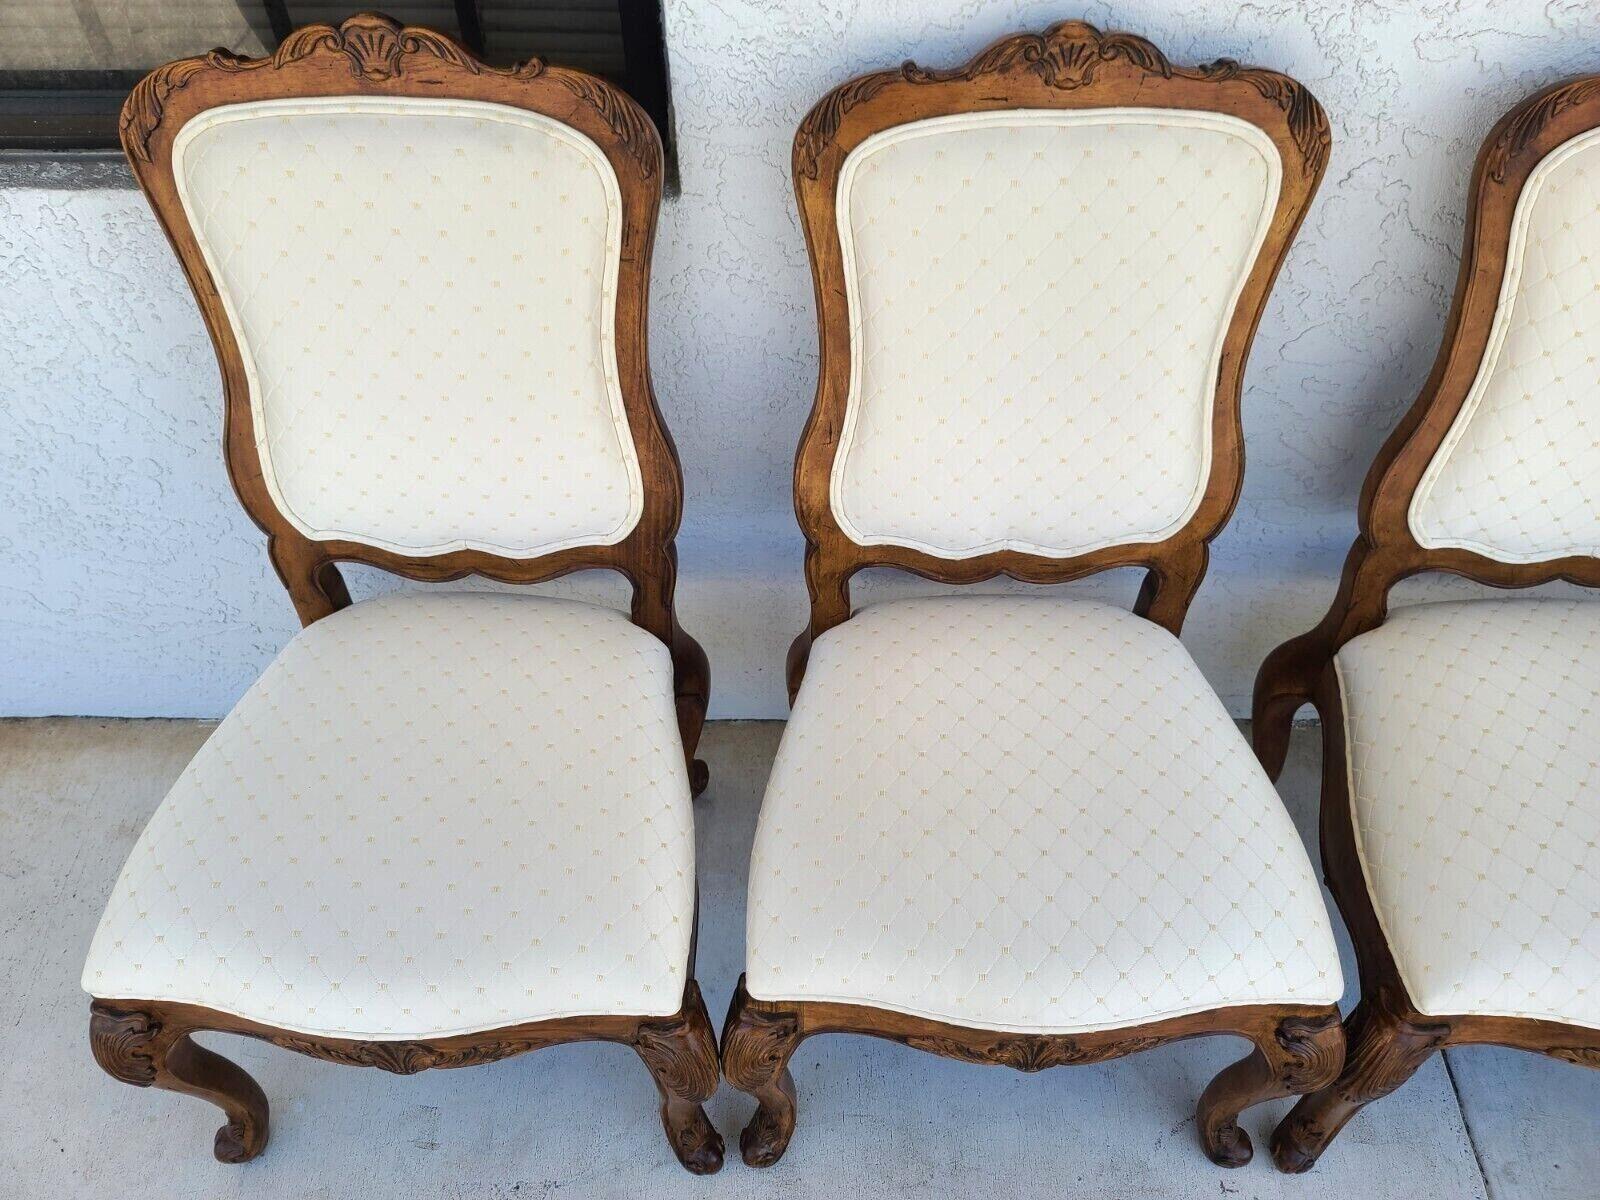 Italian Alfresco Style Dining Chairs by CENTURY FURNITURE - Set of 4 In Good Condition For Sale In Lake Worth, FL